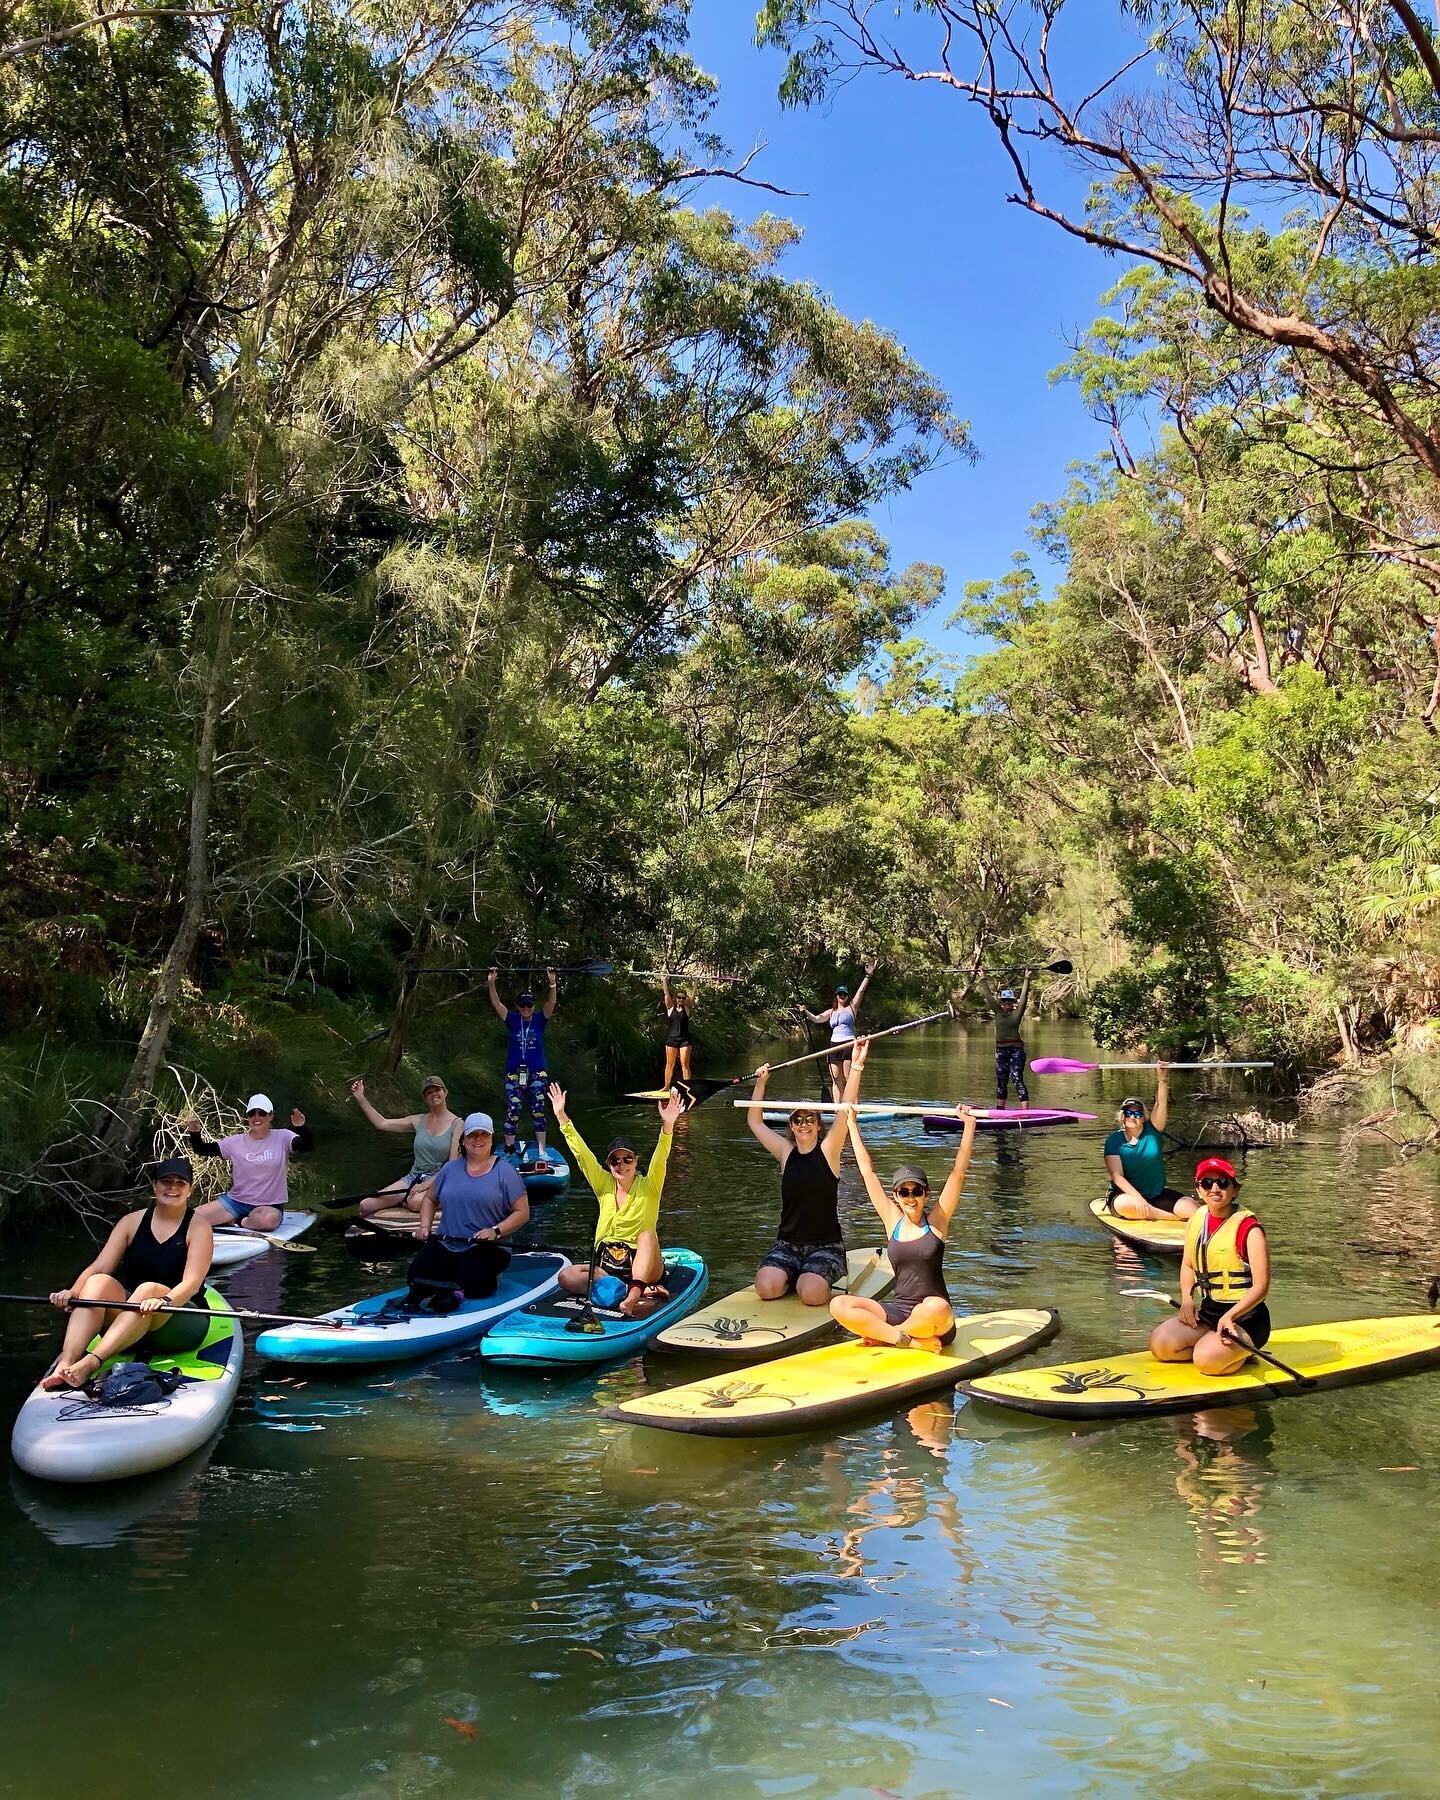 We need to talk about yesterday&rsquo;s paddle... 💬
.
Once again we were treated to another spectacular SUP adventure down at Bundeena in partnership with the fabulous team of @bundeenakayaks 🙌🏼
.
What I loved most about yesterday (and I feel I al